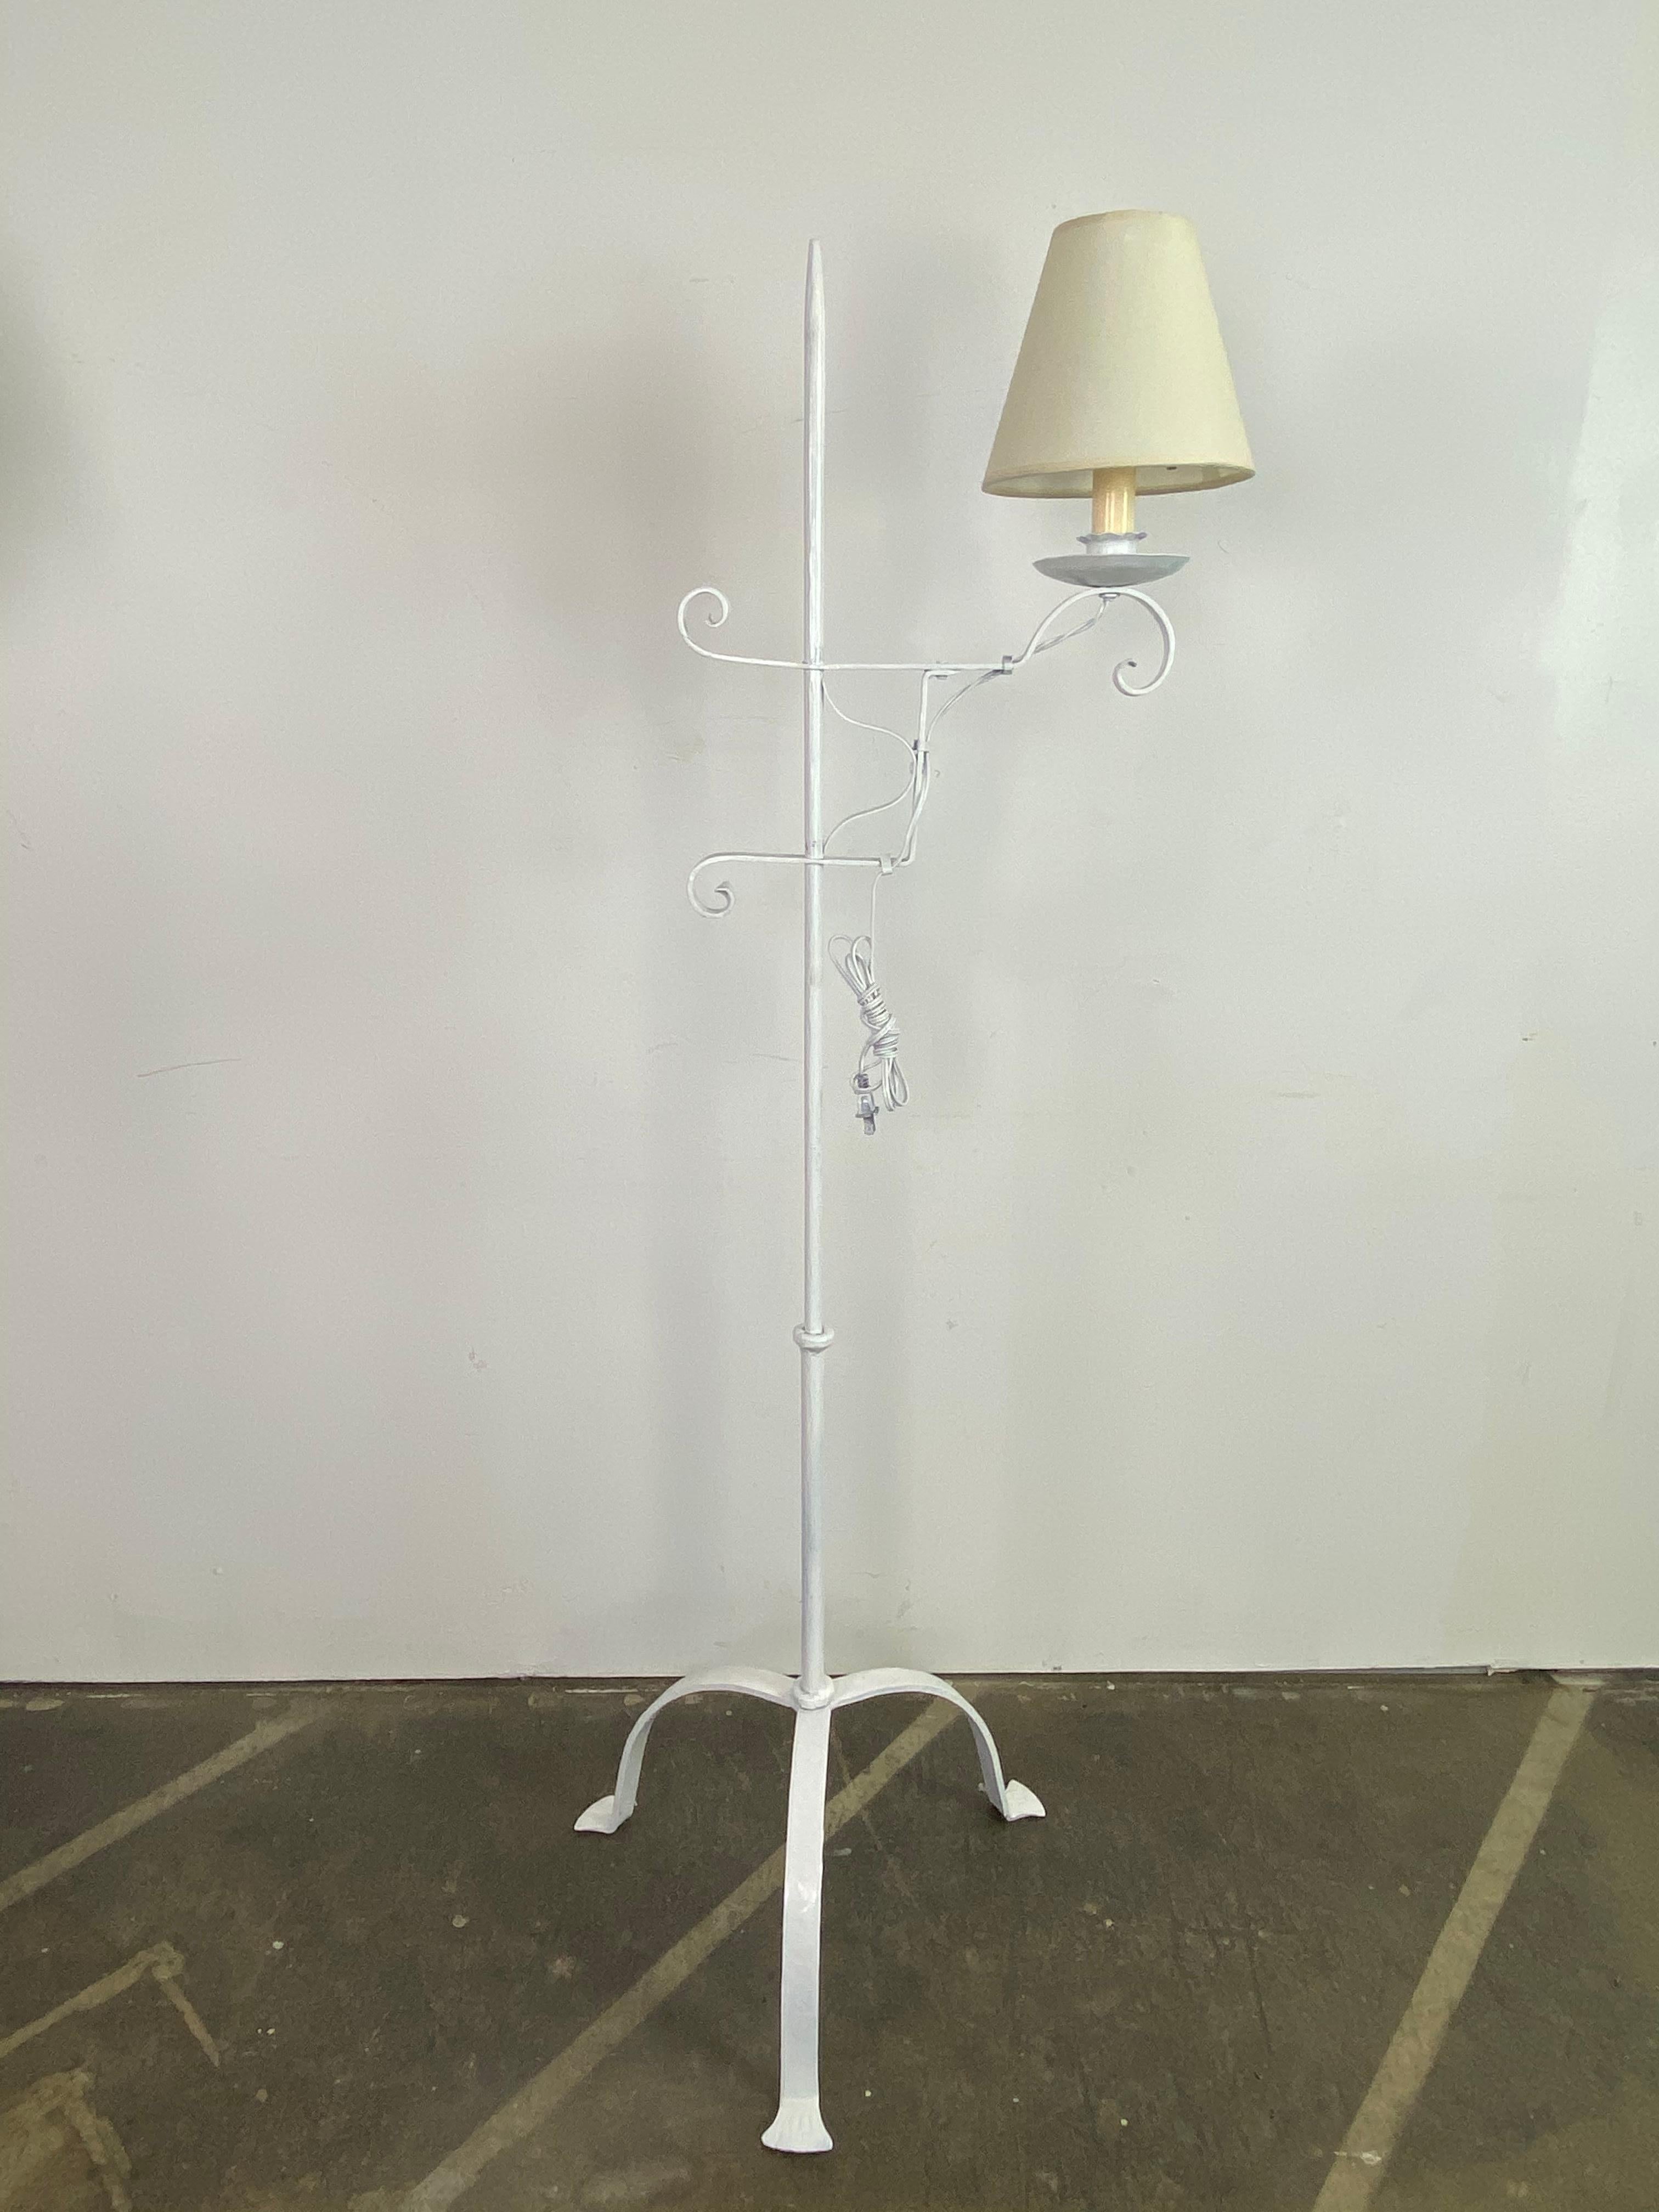 Elegant and clean wrought iron bridge floor lamp, recoated in white and outfitted with new shade. Accommodates modern style LED bulbs too. Recoated white.